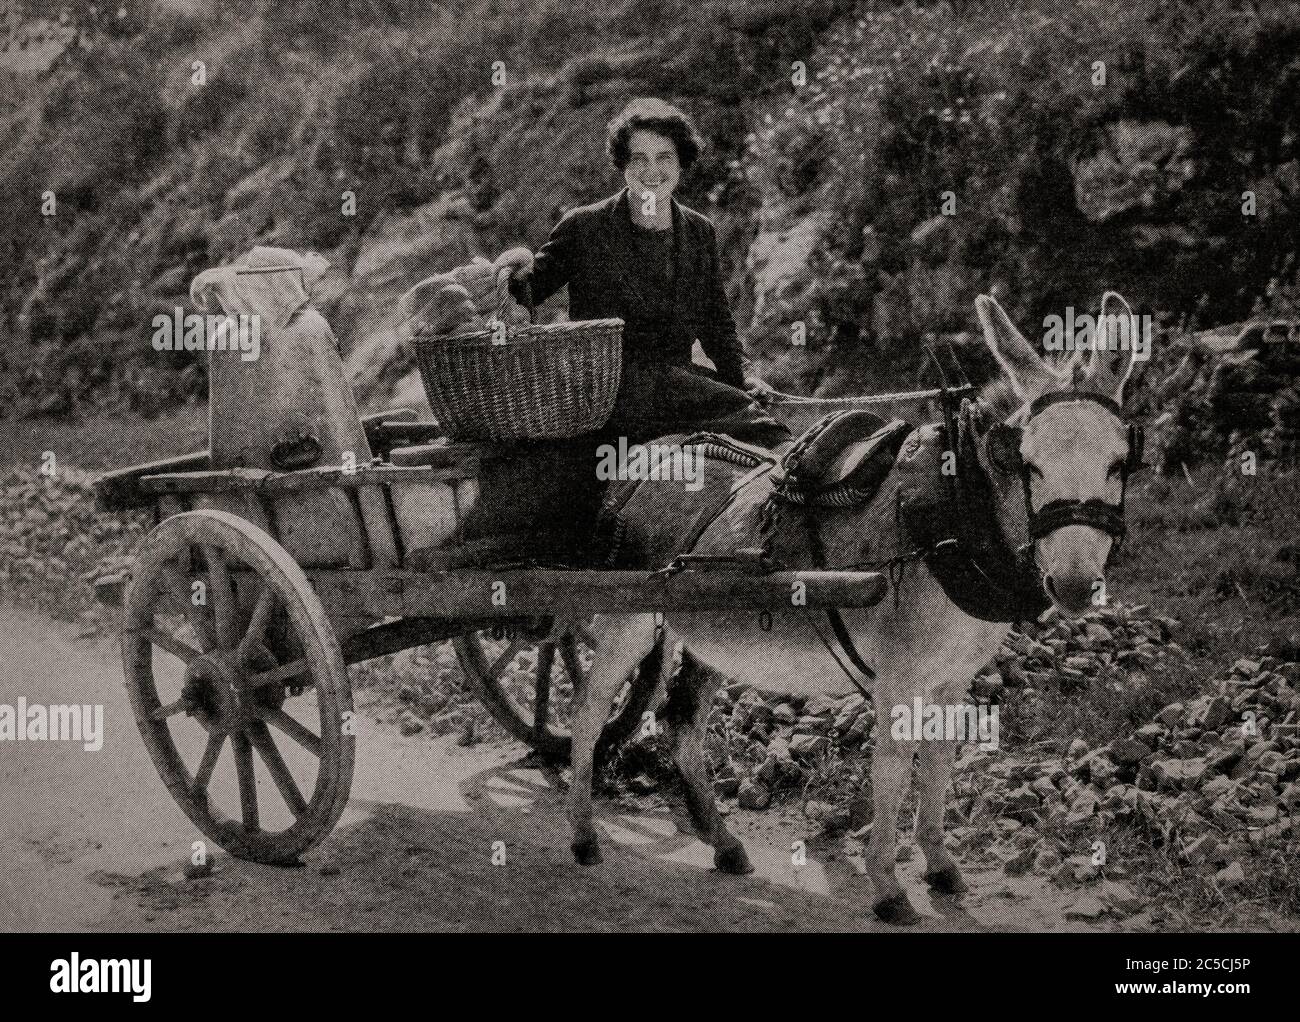 An early 1920's view of an Irish woman in County Tipperary riding to the local creamery  on a traditional cart pulled by donkey power, with a churn of fresh milk. Originally photographed by Clifton Adams (1890-1934) for 'Ireland: The Rock Whence I Was Hewn', a National Geographic Magazine feature from March 1927. Stock Photo